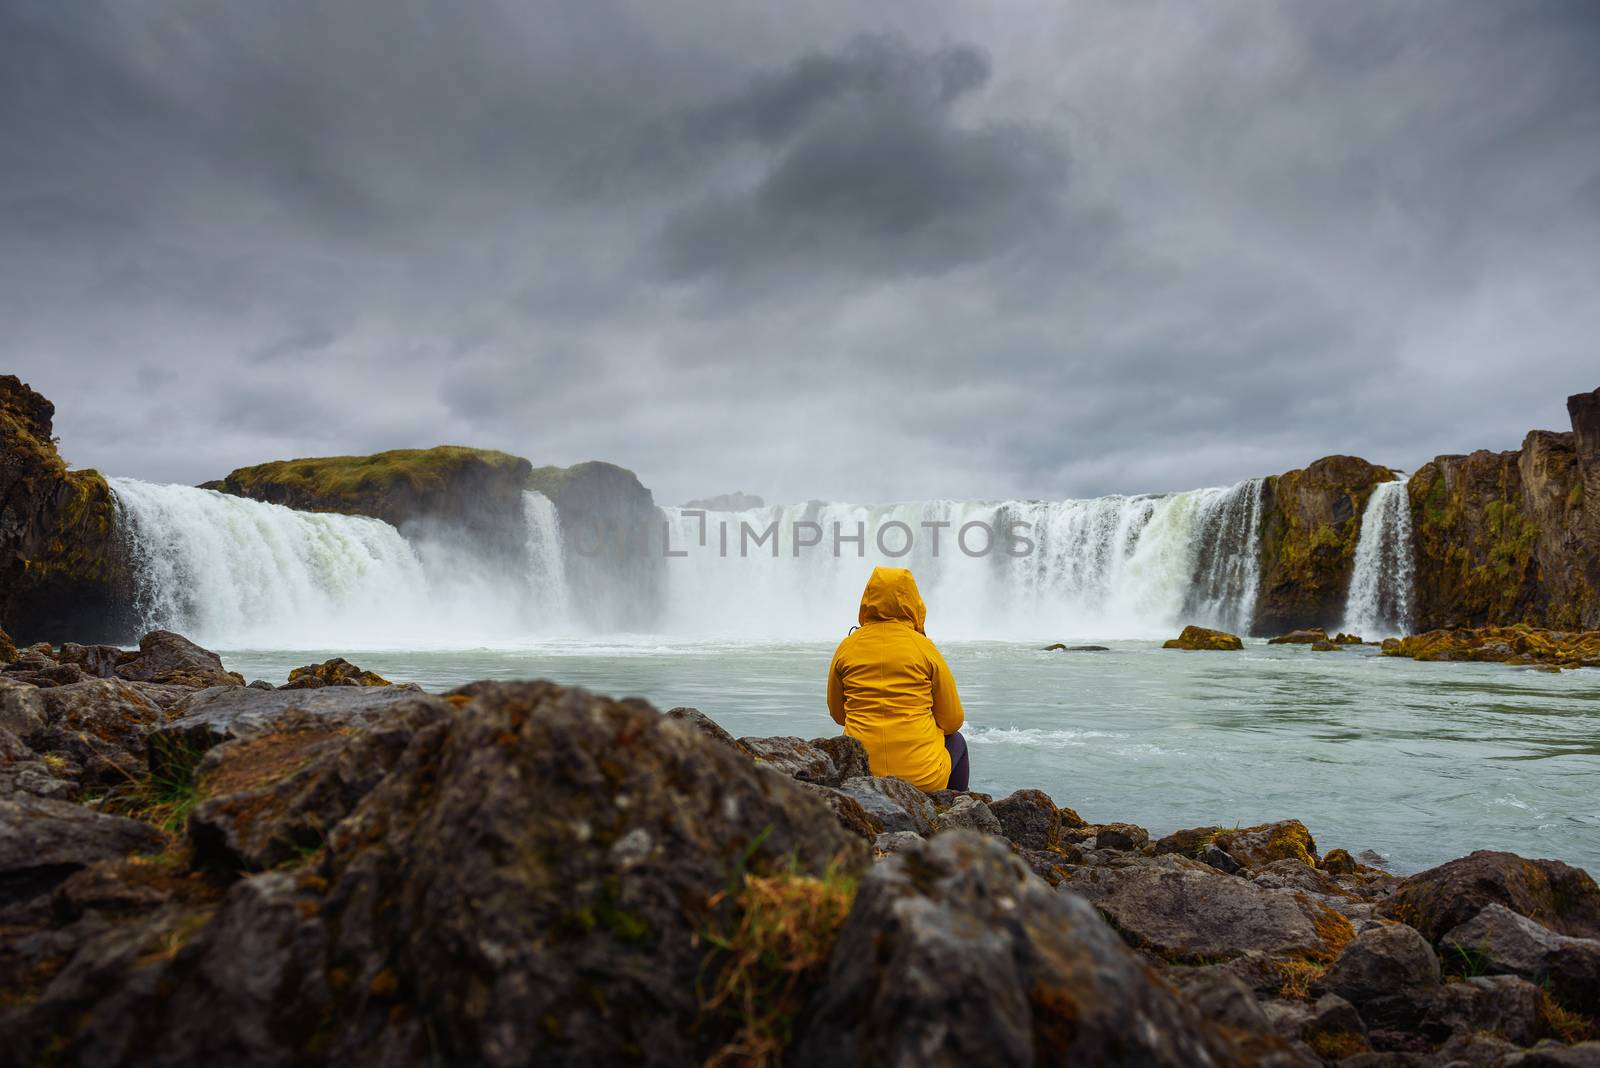 Tourist in a yellow jacket relaxing at the Godafoss waterfall in Iceland. Godafoss means the waterfall of the gods in icelandic.